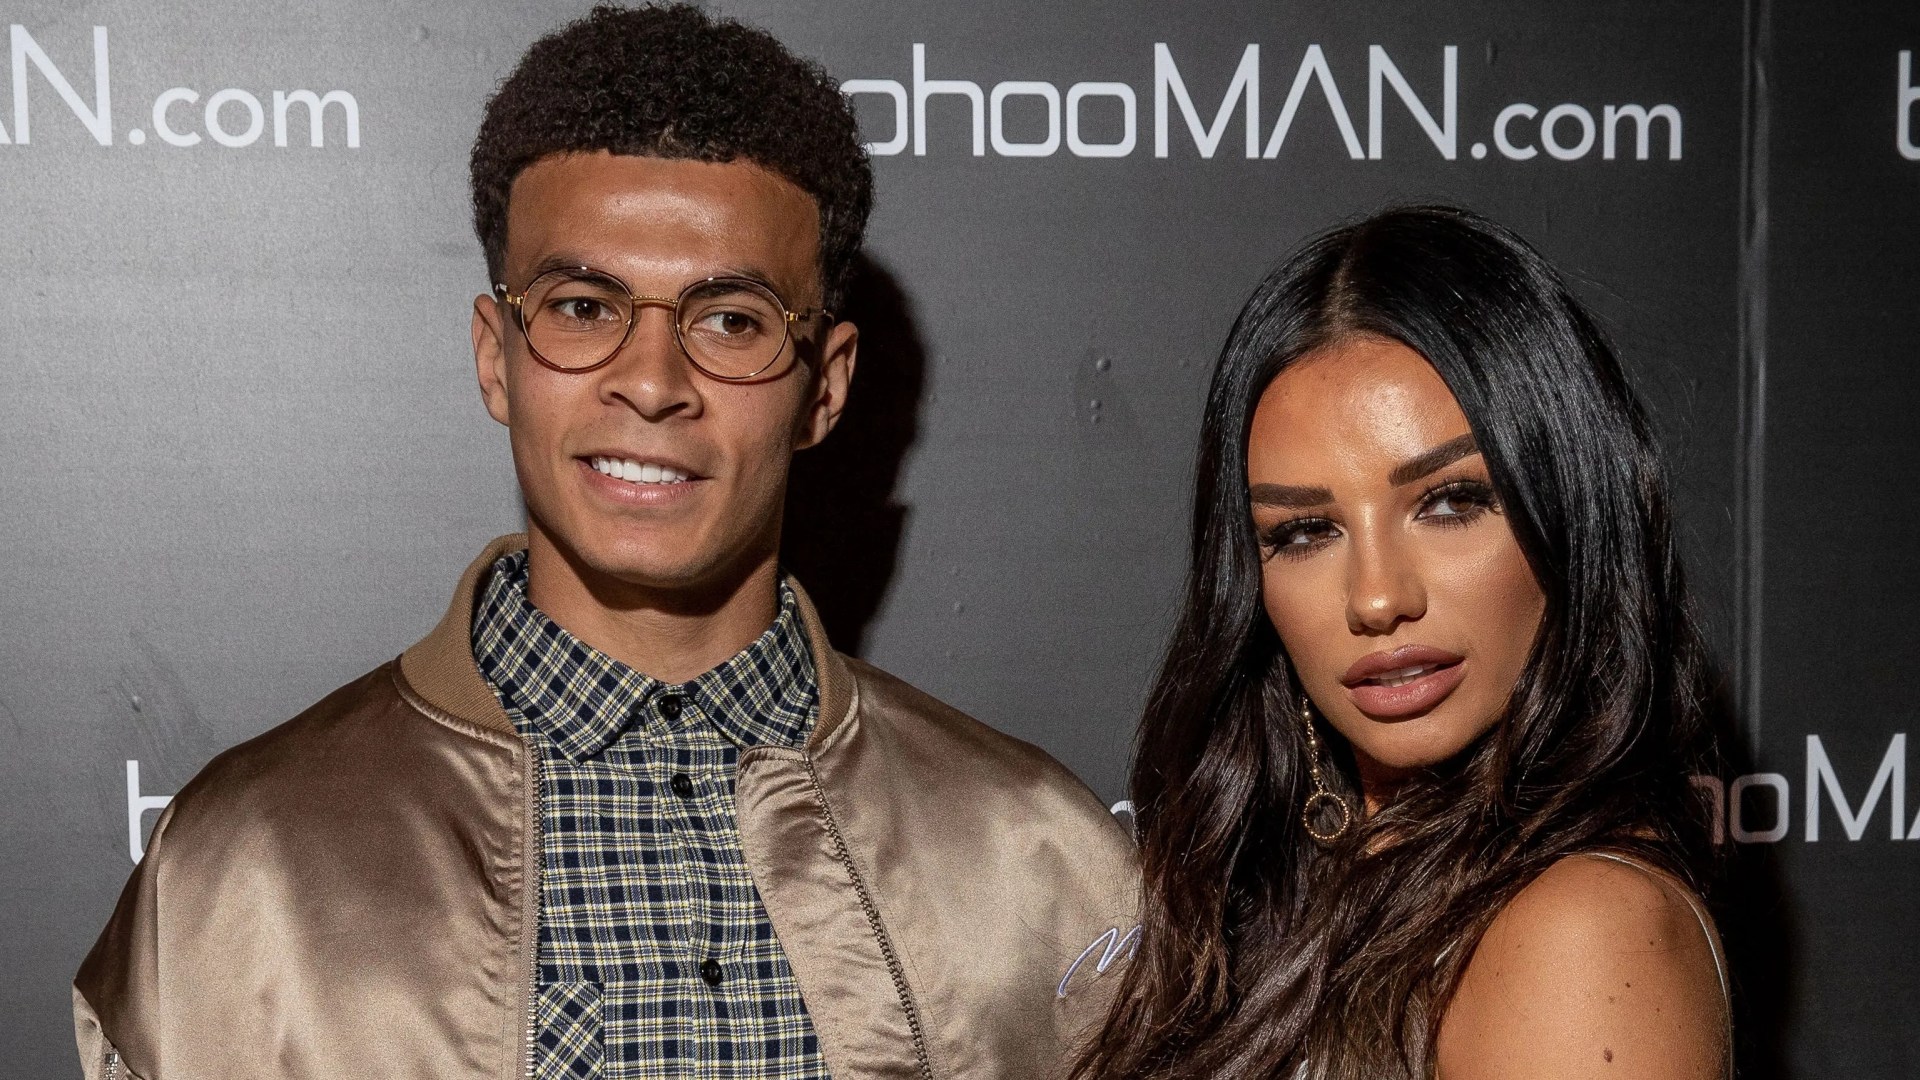 Masked thugs roughed up Dele Alli during armed raid at his house… I was terrified and feared I’d die, says ex Ruby Mae [Video]